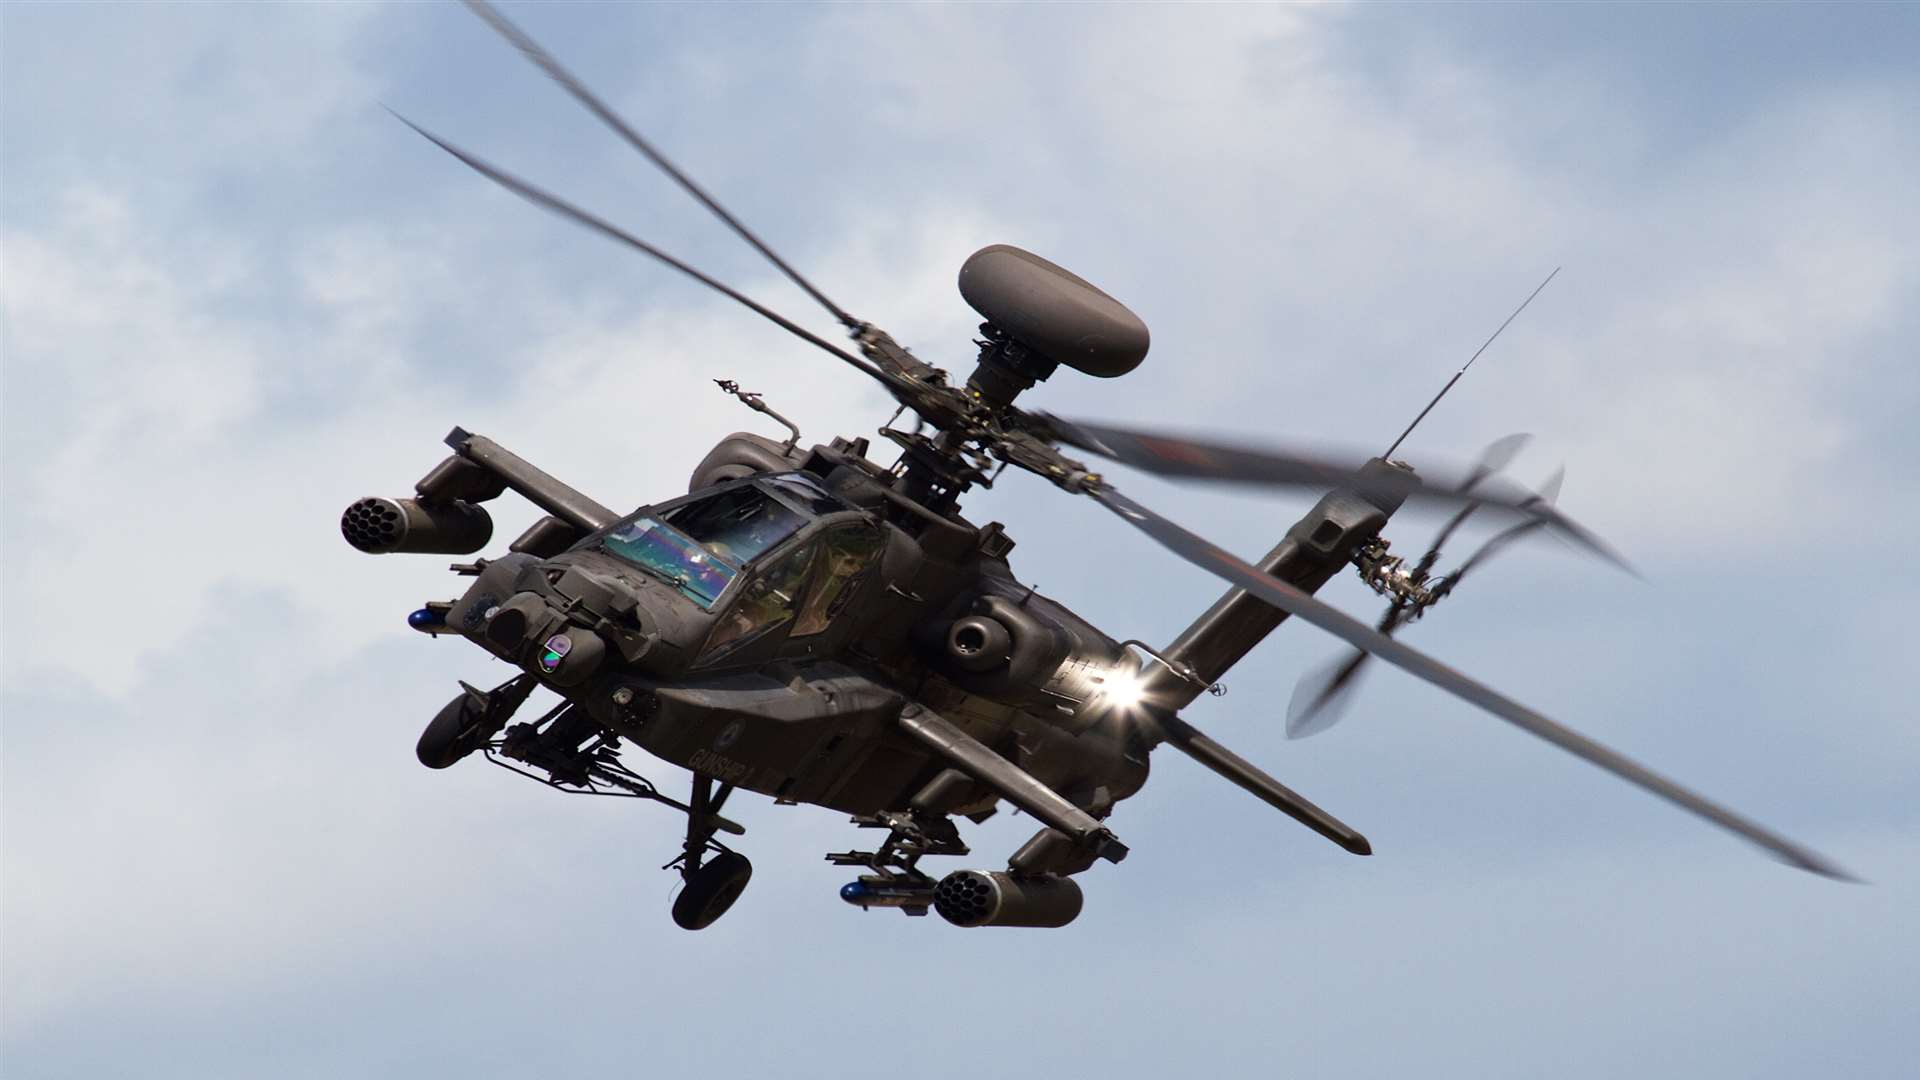 The Apache helicopter